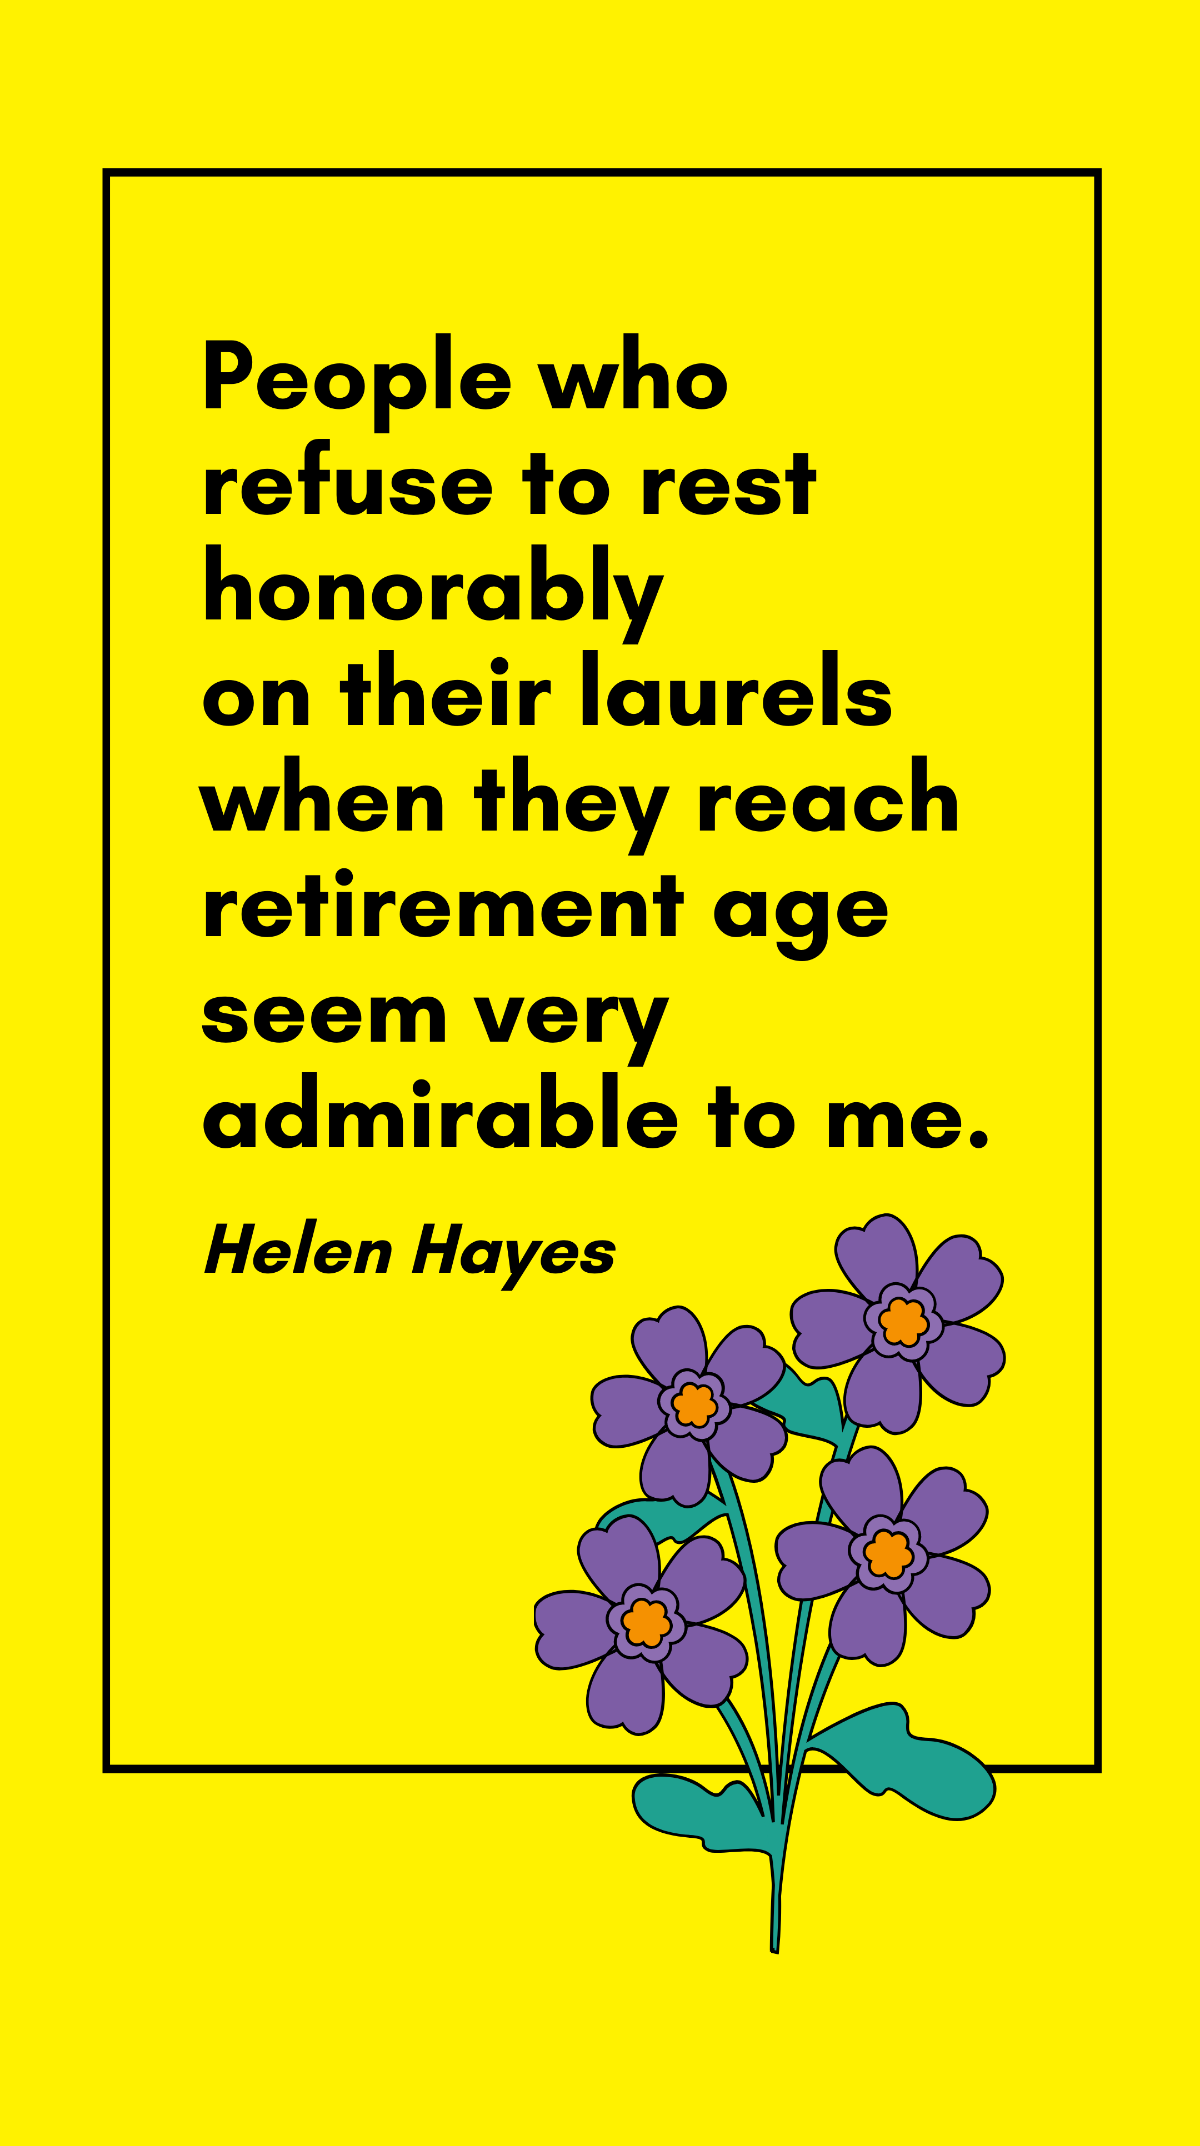 Helen Hayes - People who refuse to rest honorably on their laurels when they reach retirement age seem very admirable to me. Template